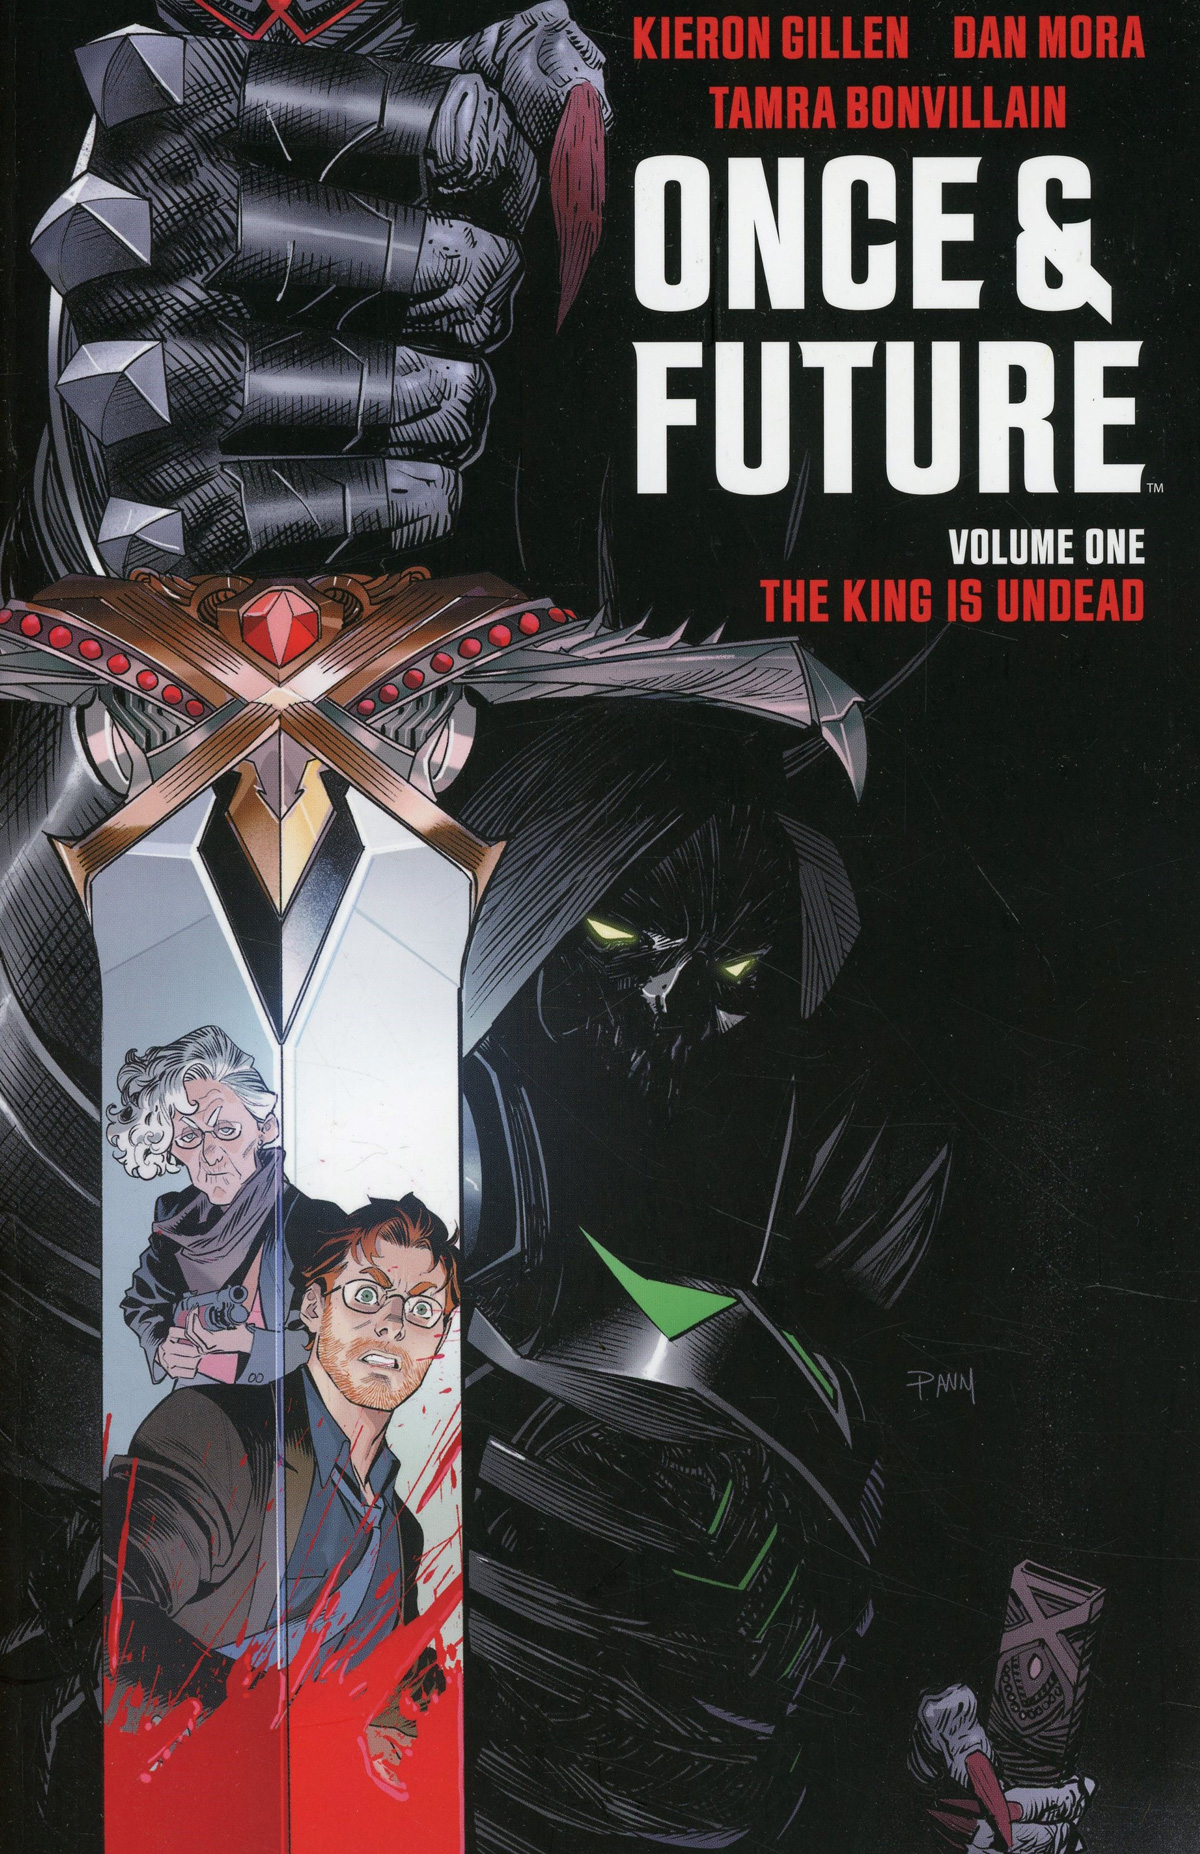 Once & Future Vol 1 TP